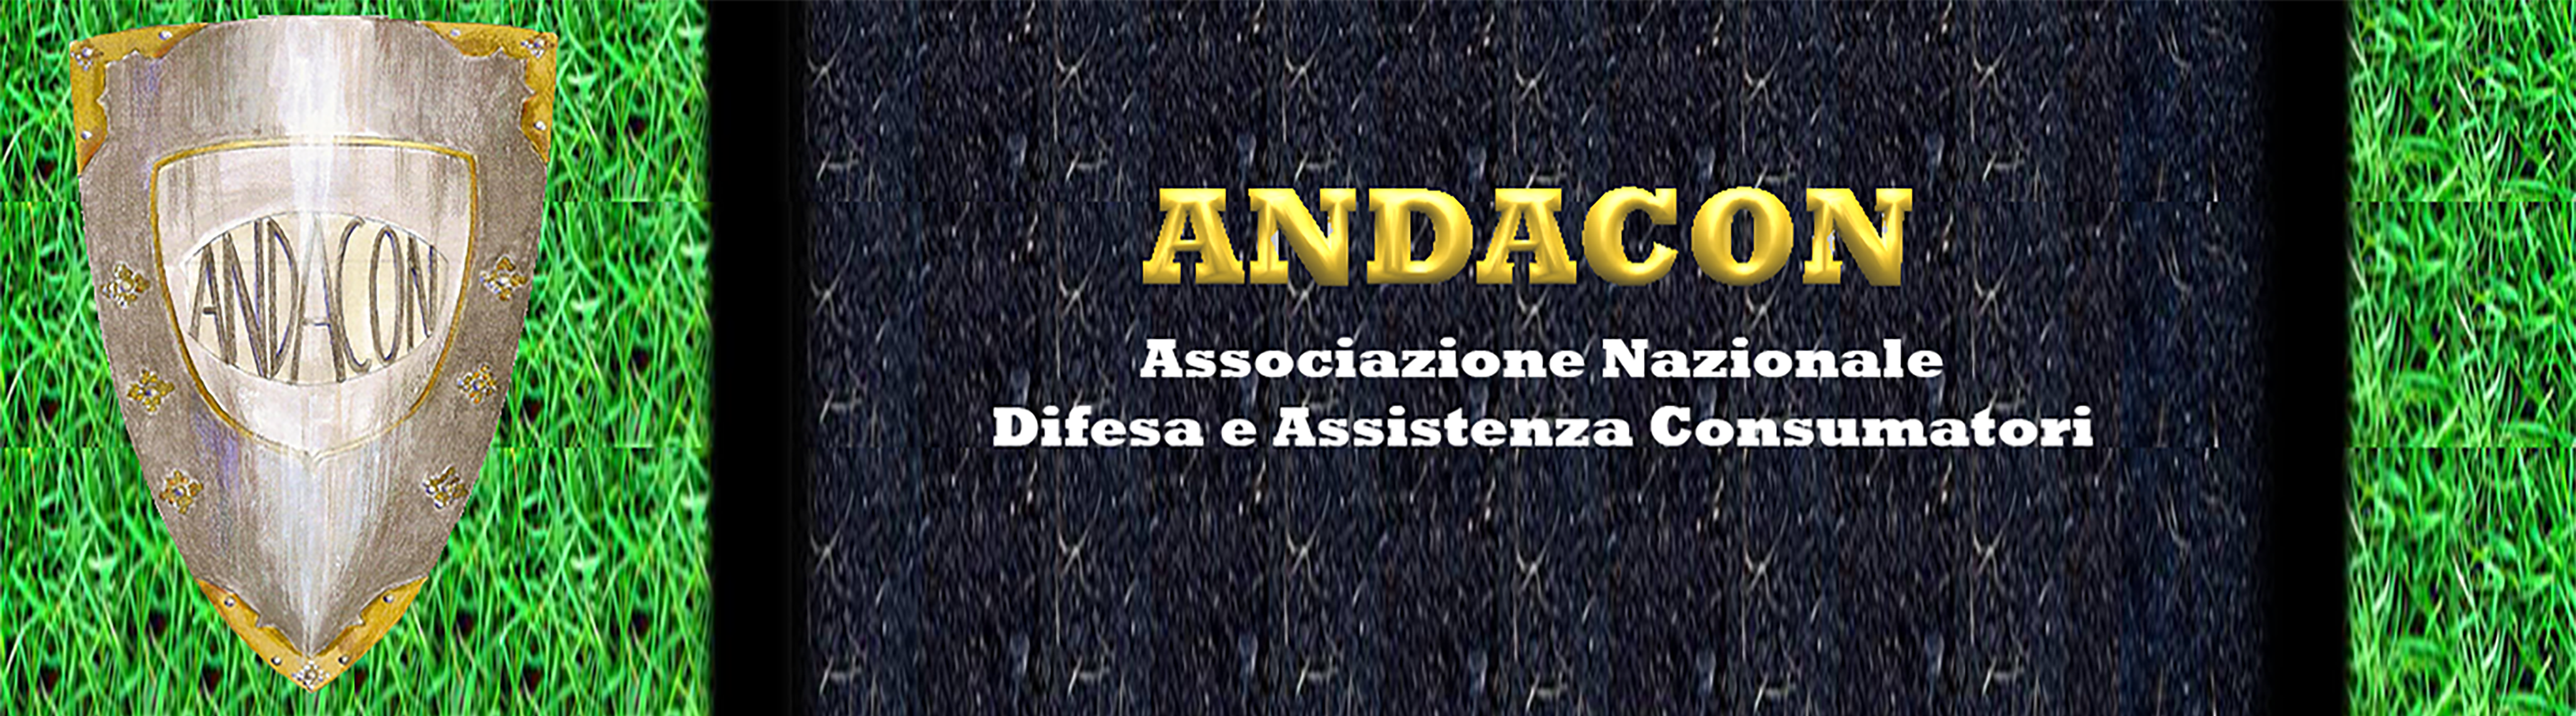 ANDACON